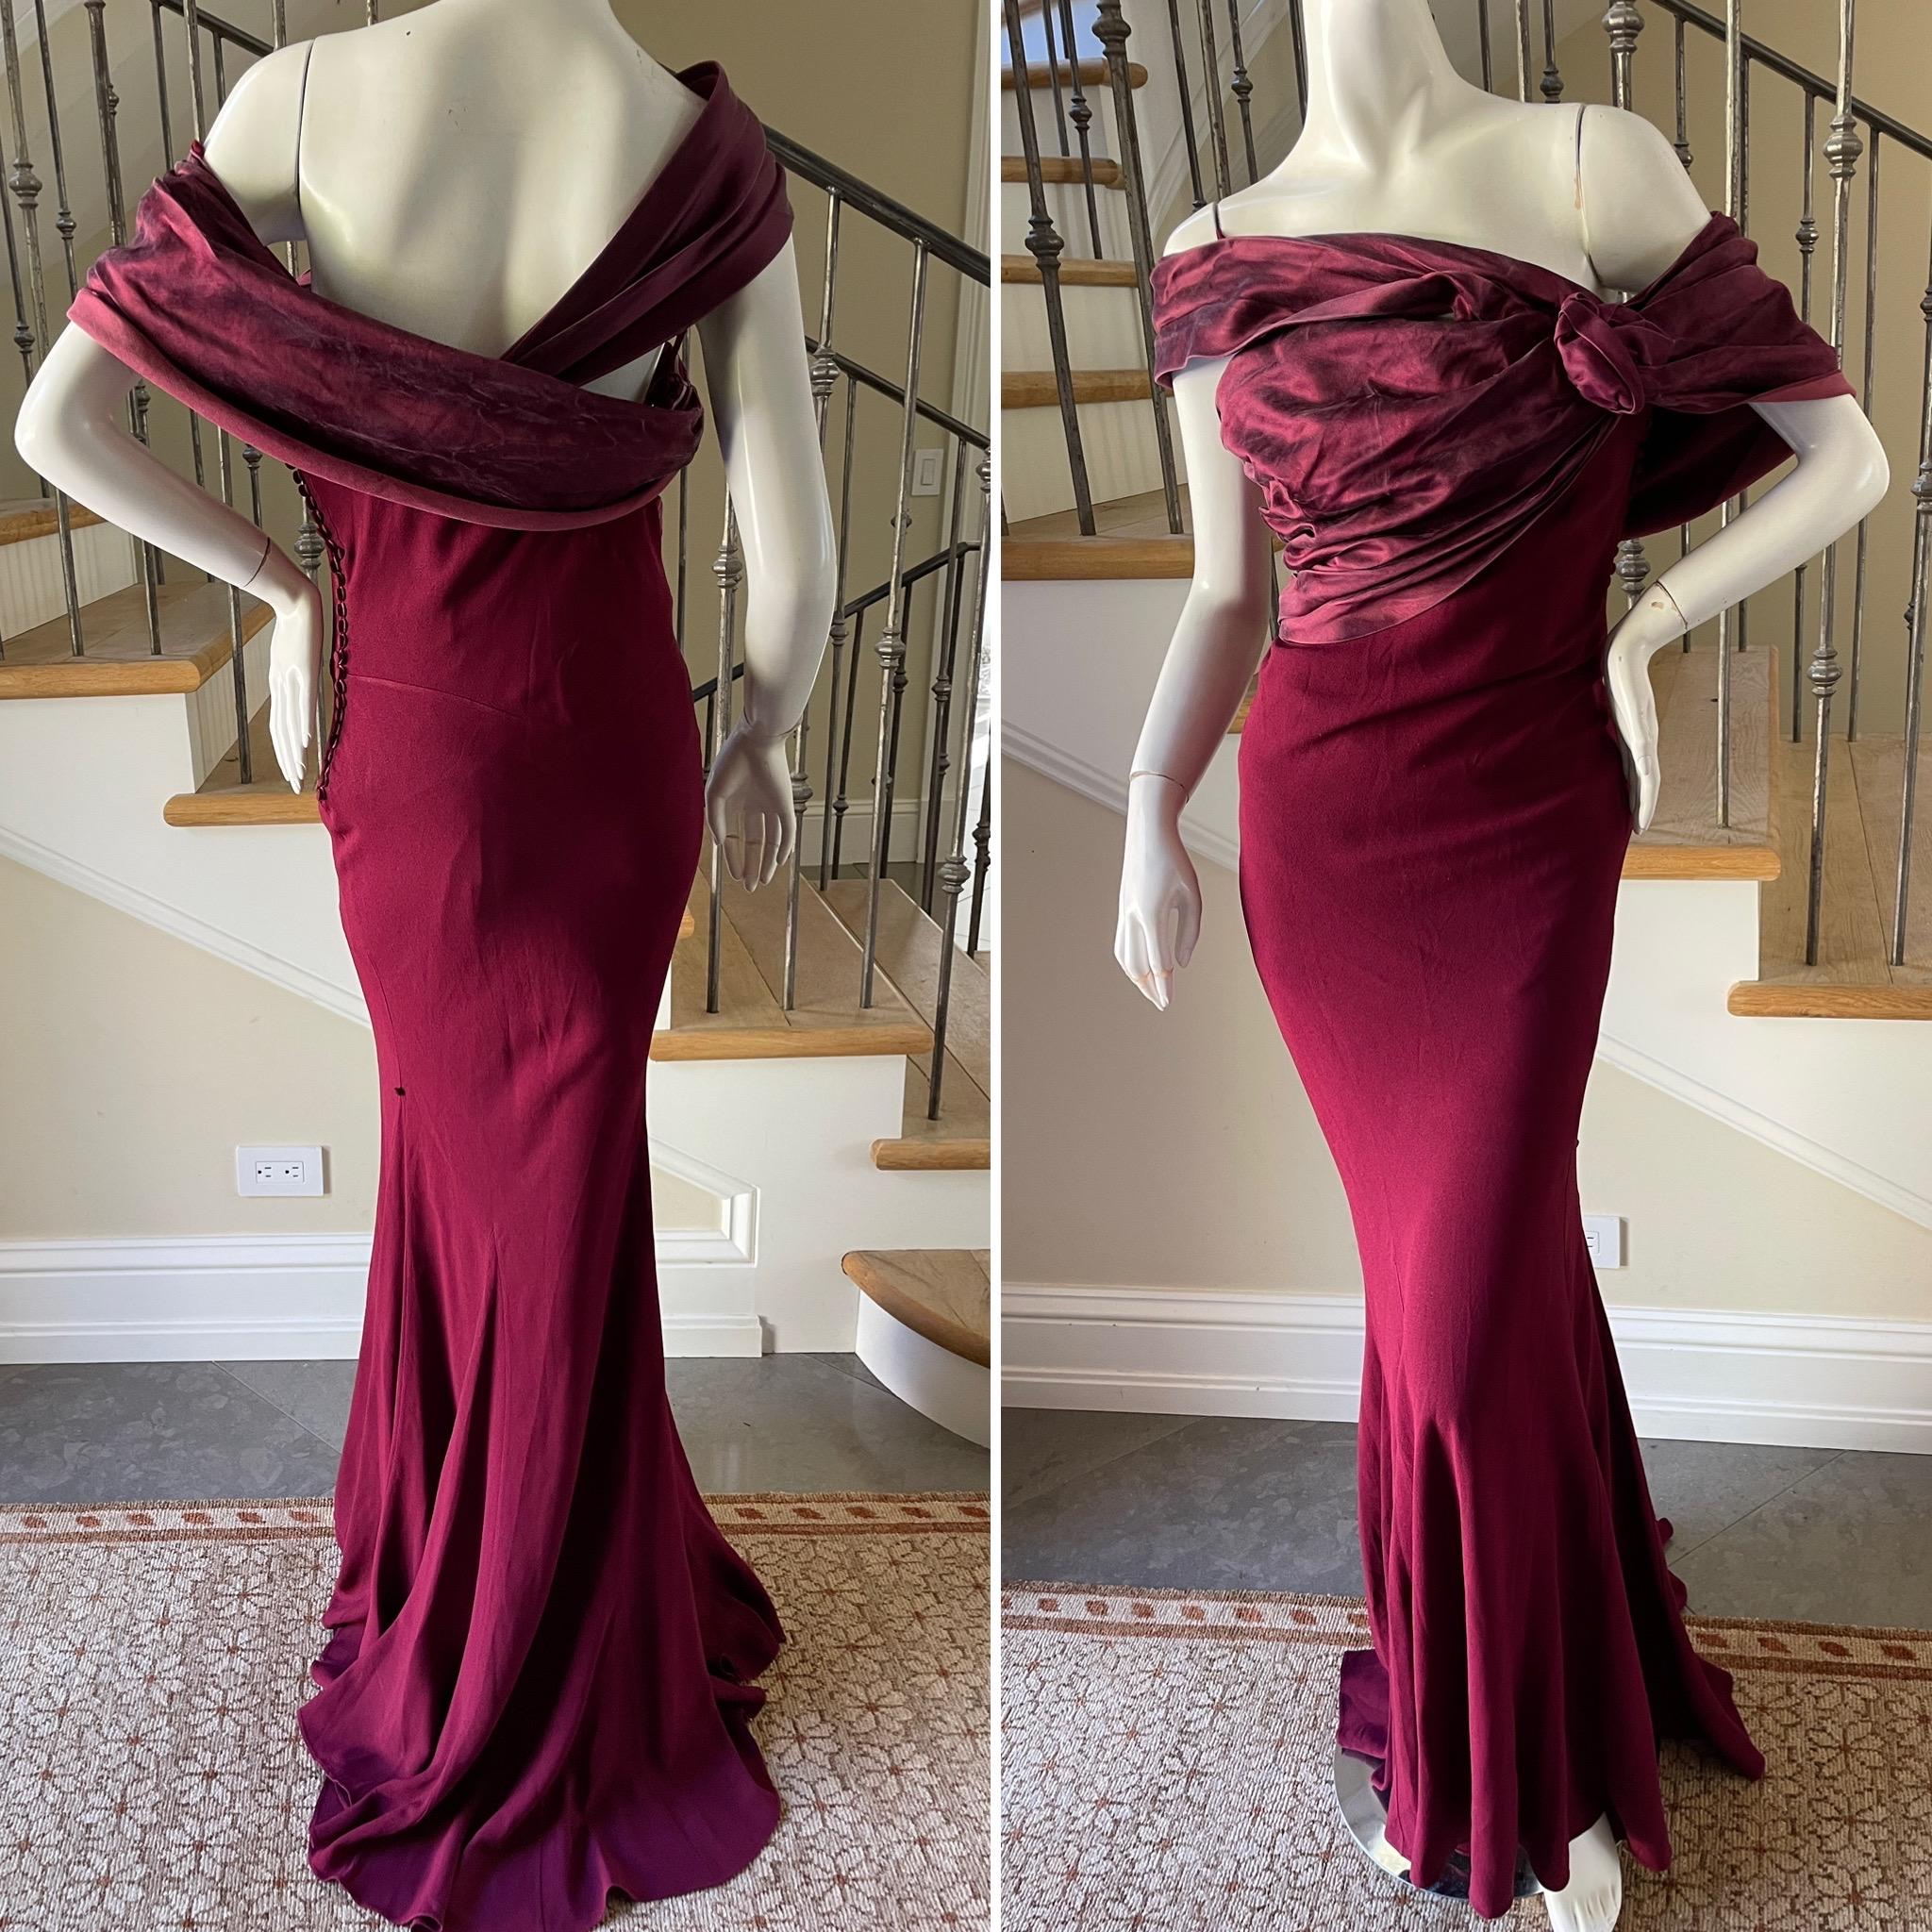 Christian Dior by John Galliano Burgundy Red Draped Evening Dress.
There is an inner corset bustier , I'm not certain I styled it correctly, but it is really  pretty.
 Size 40 Fr 8 US
Bust 38